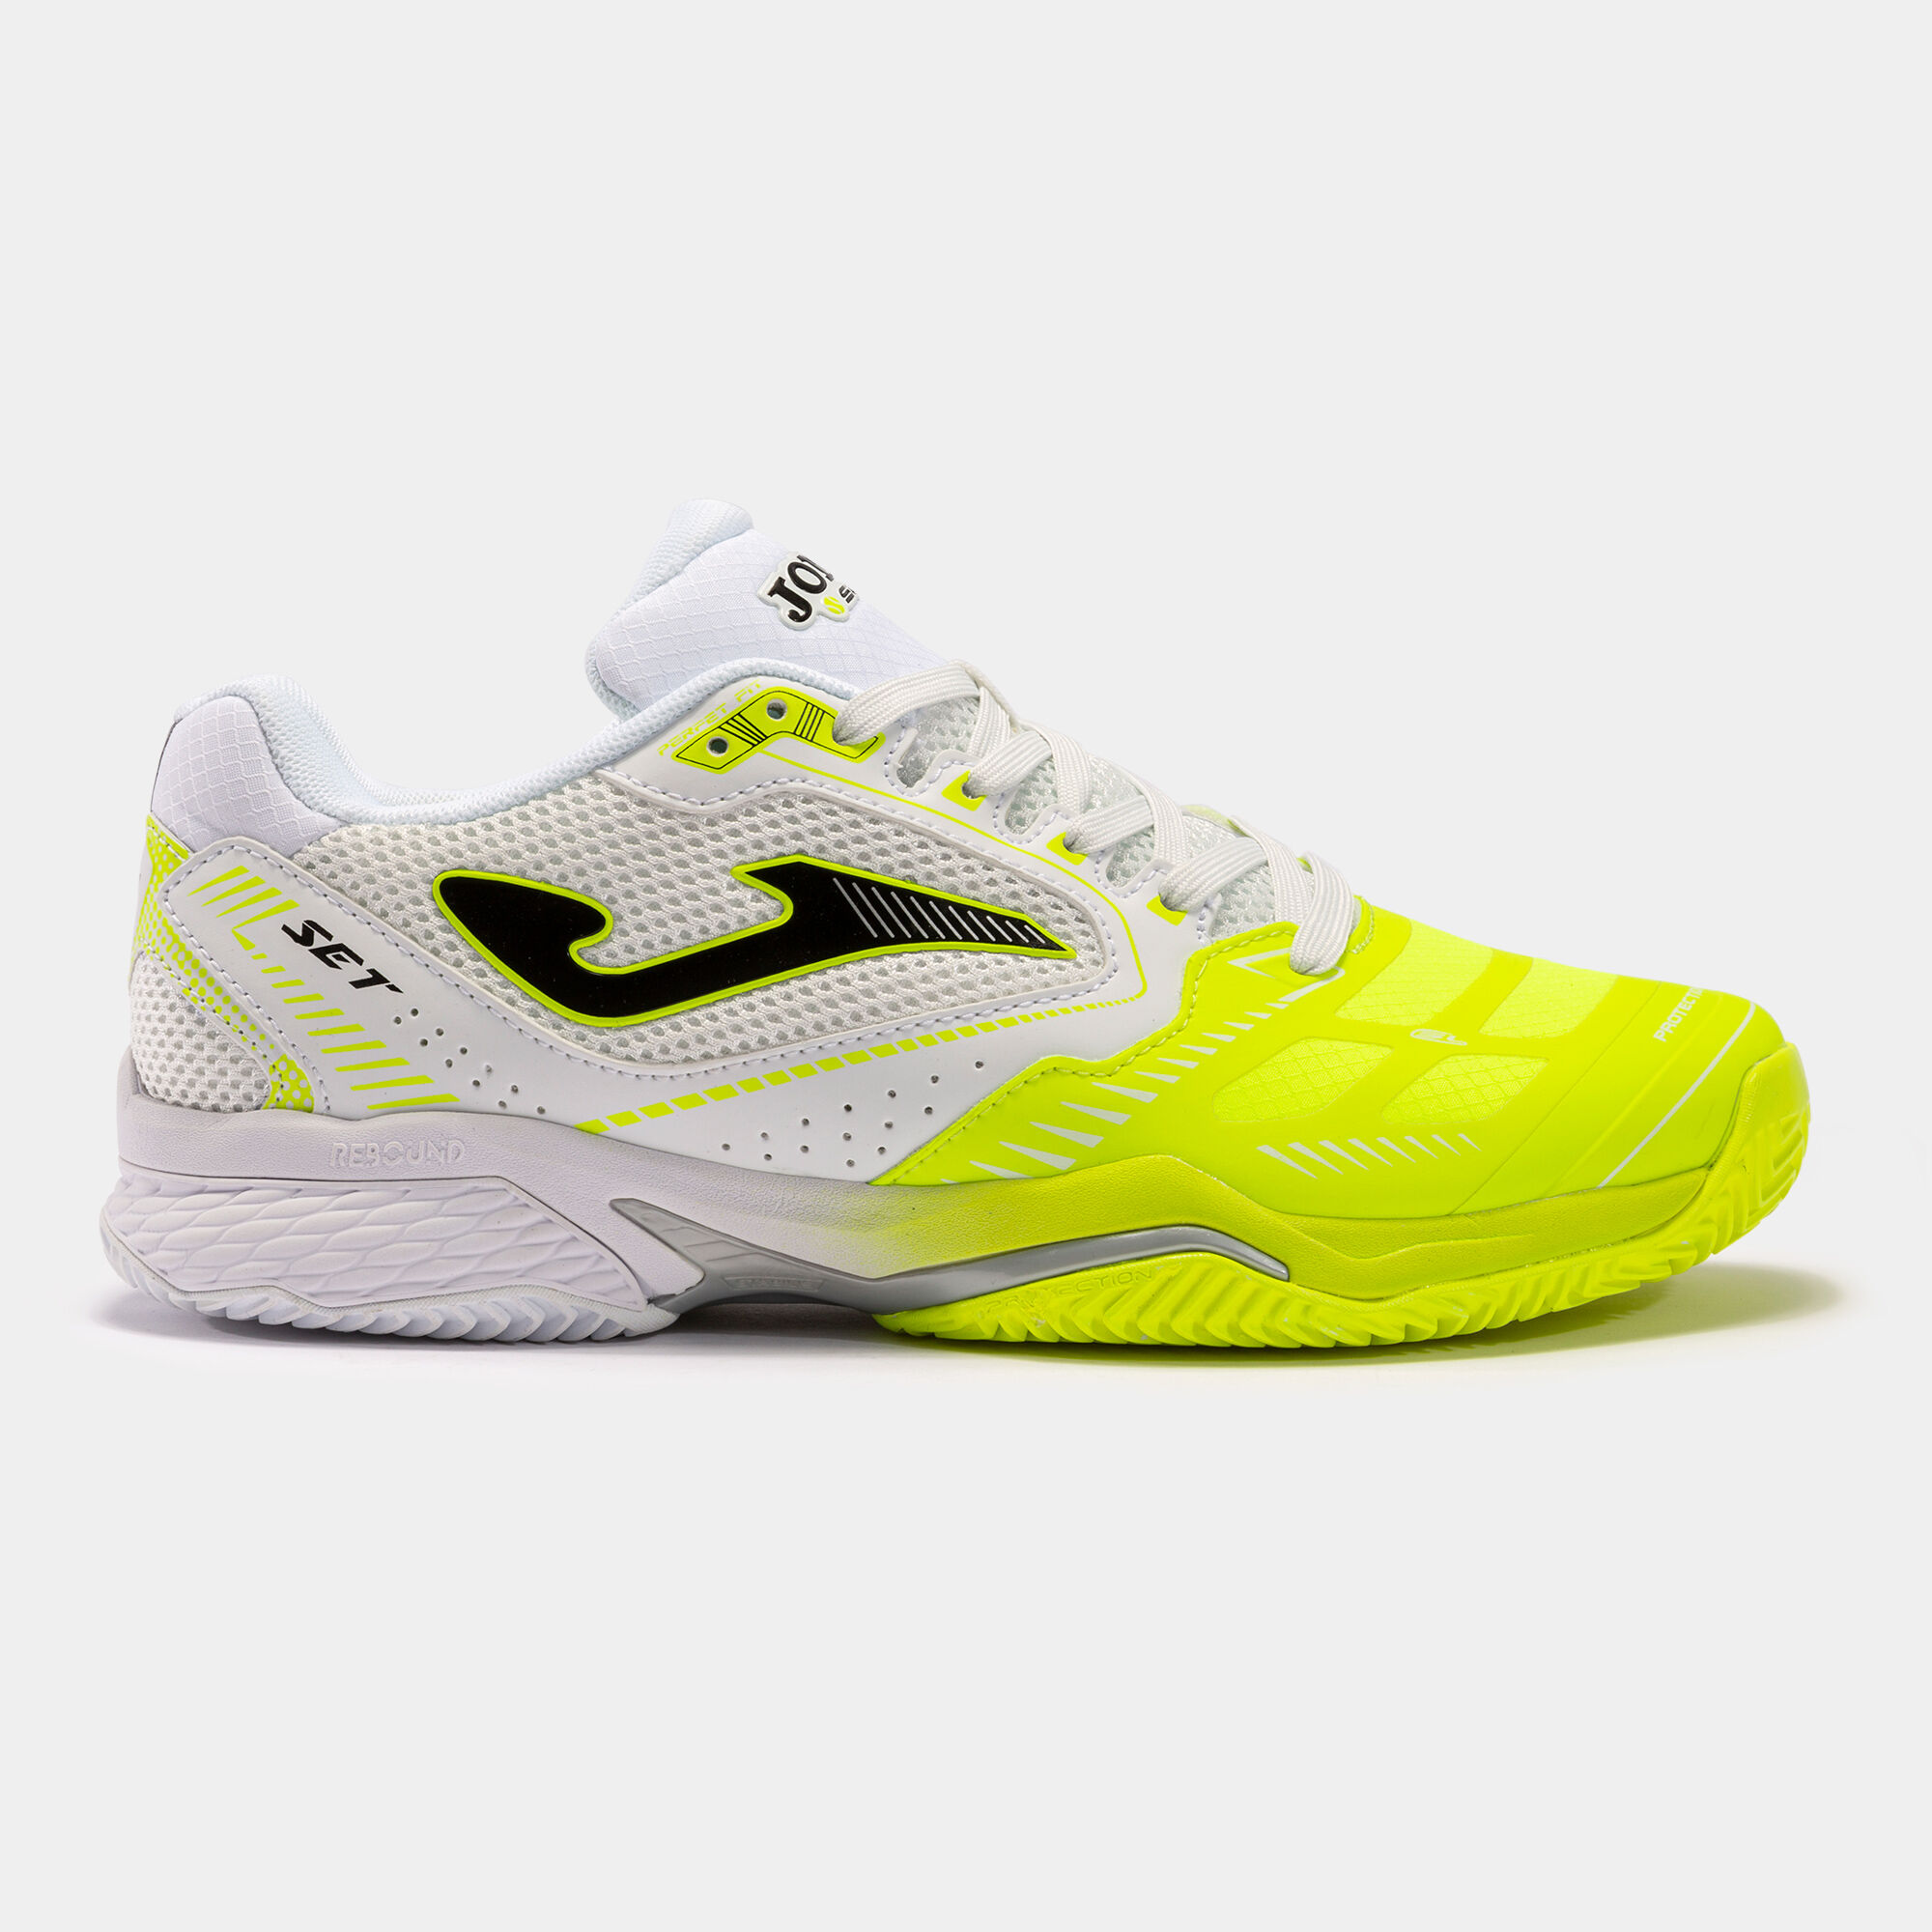 SHOES SET 22 CLAY MAN FLUORESCENT YELLOW WHITE